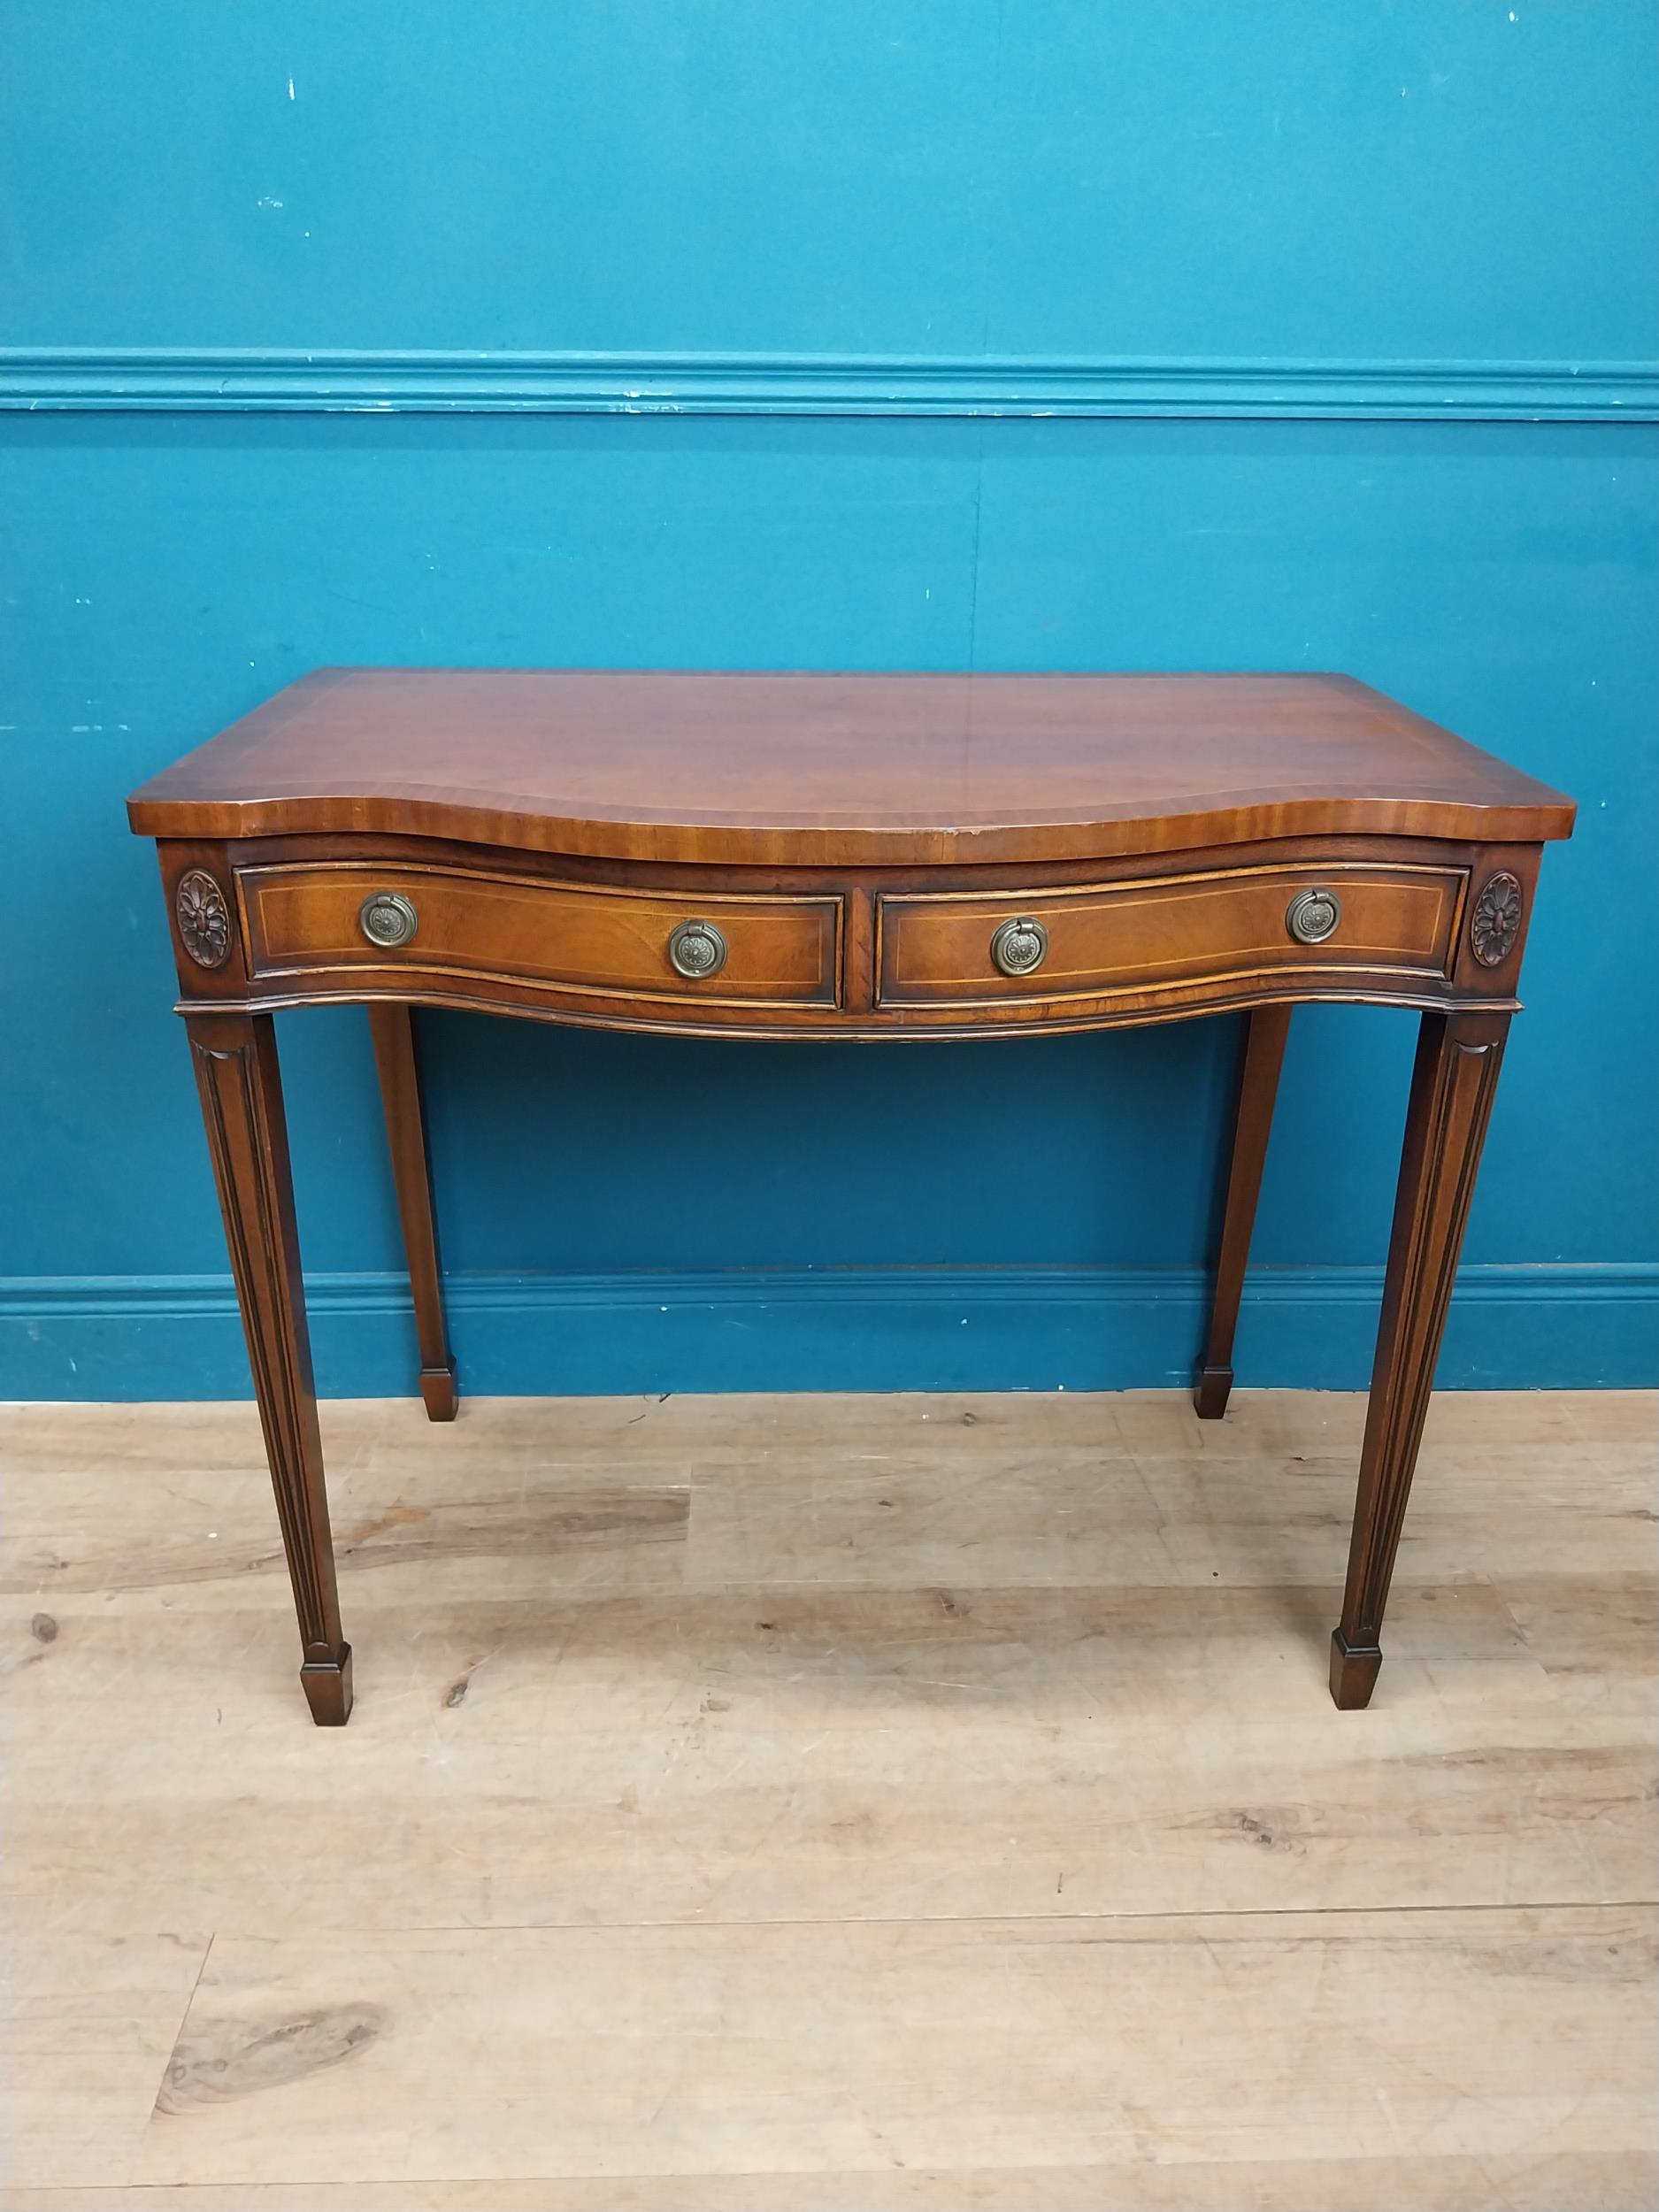 Mahogany and satinwood side table with serpentine front and two drawers in frieze raised on - Image 2 of 6